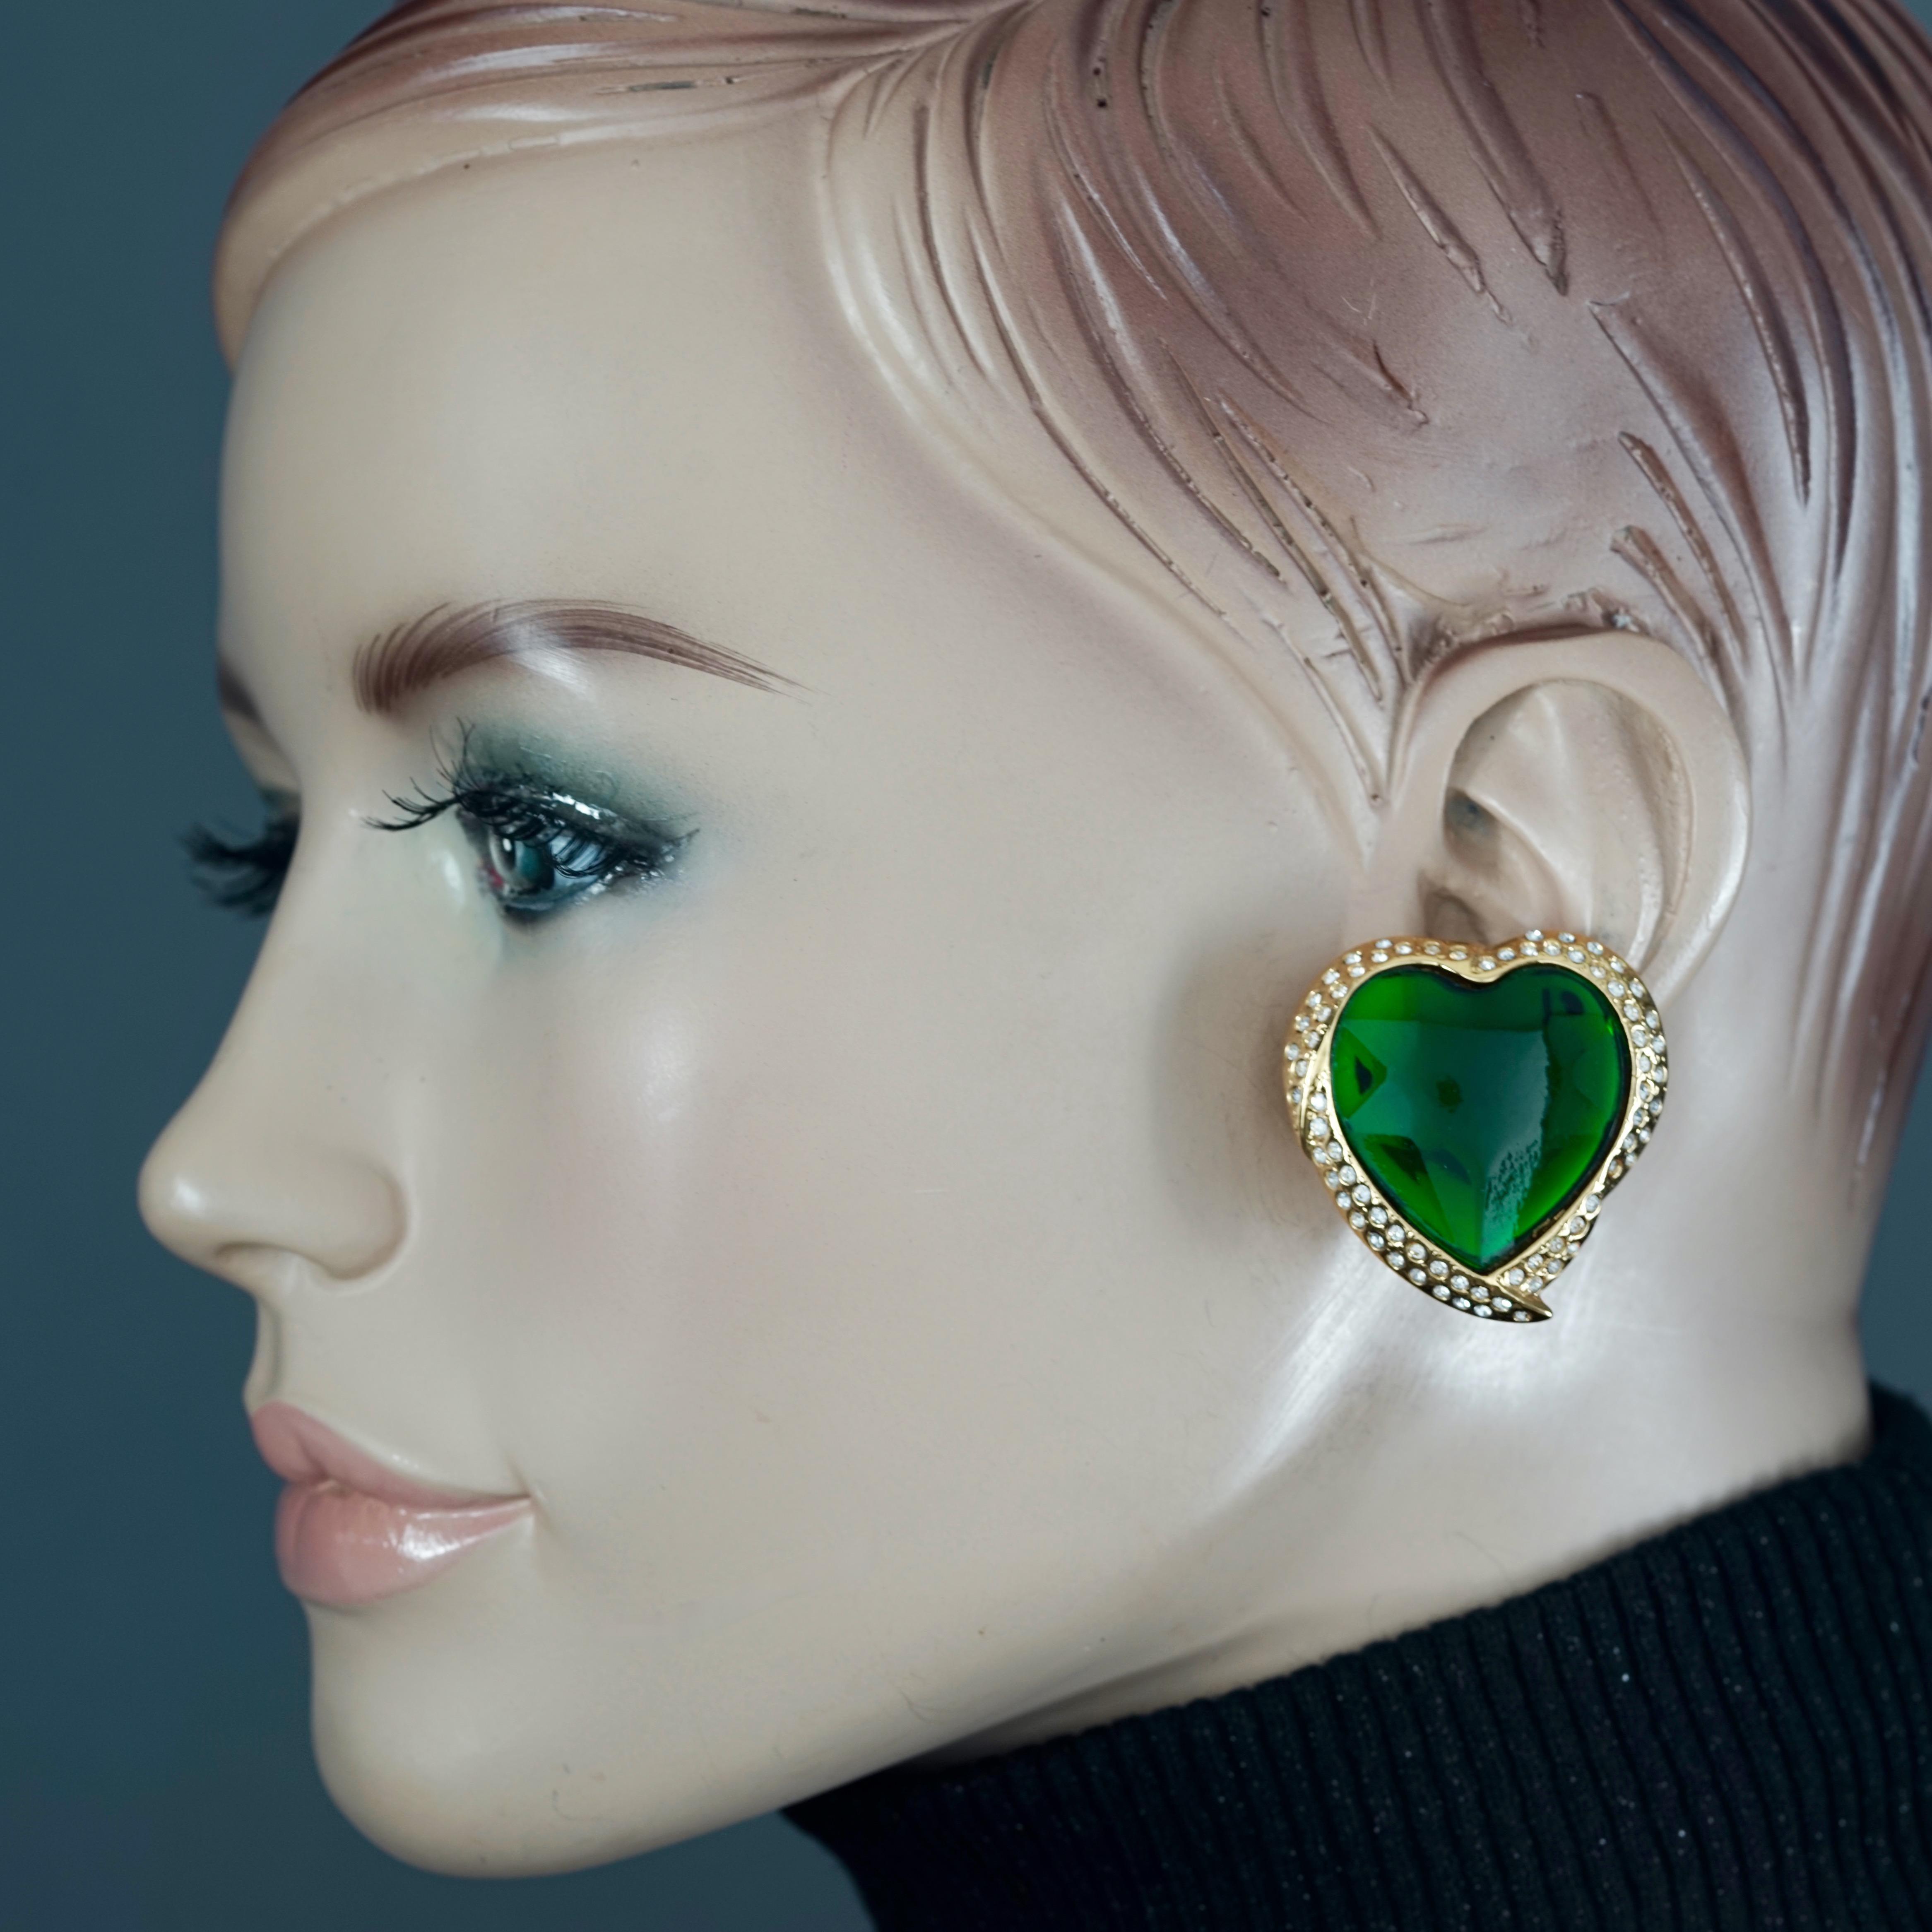 Vintage YVES SAINT LAURENT Ysl Emerald Green Faceted Heart Rhinestone Earrings

Measurements:
Height: 1.42 inches (3.6 cm)
Width: 1.38 inches (3.5 cm)
Weight per Earring: 16 grams

Features:
- 100% Authentic YVES SAINT LAURENT.
- Raised faceted